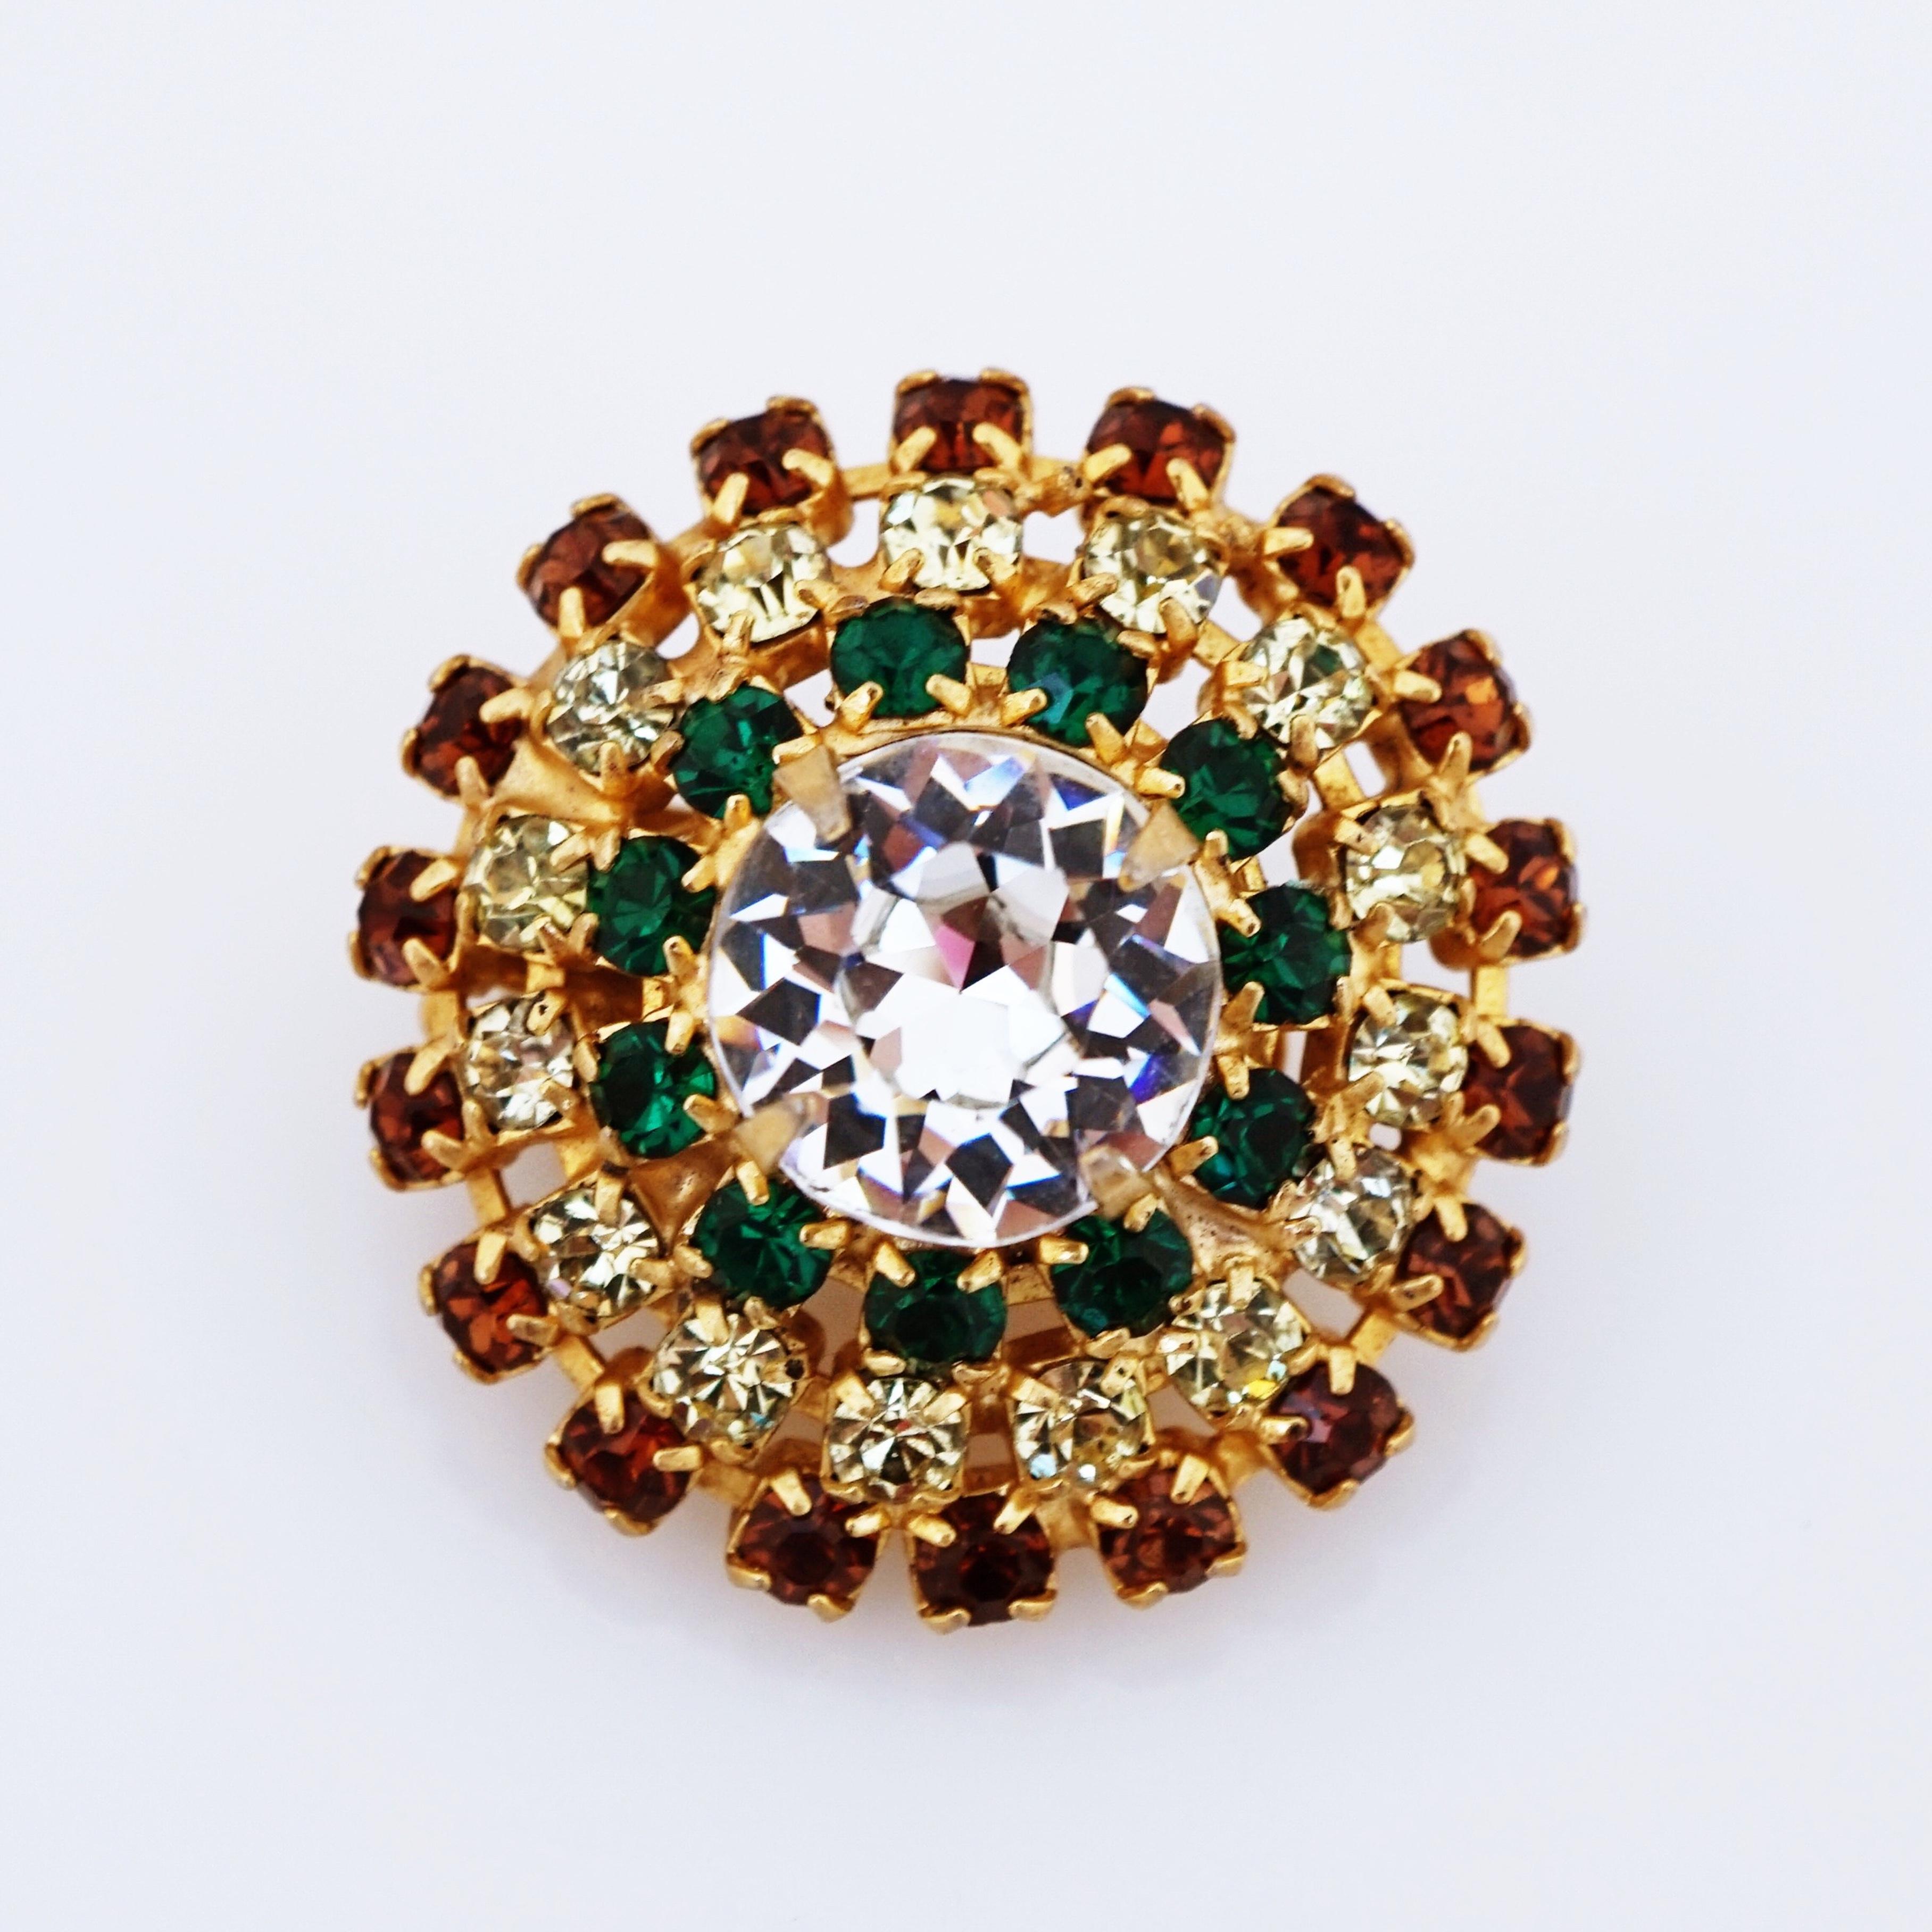 Modern Smoked Topaz and Emerald Rhinestone Dome Earrings By Hobé, 1960s For Sale